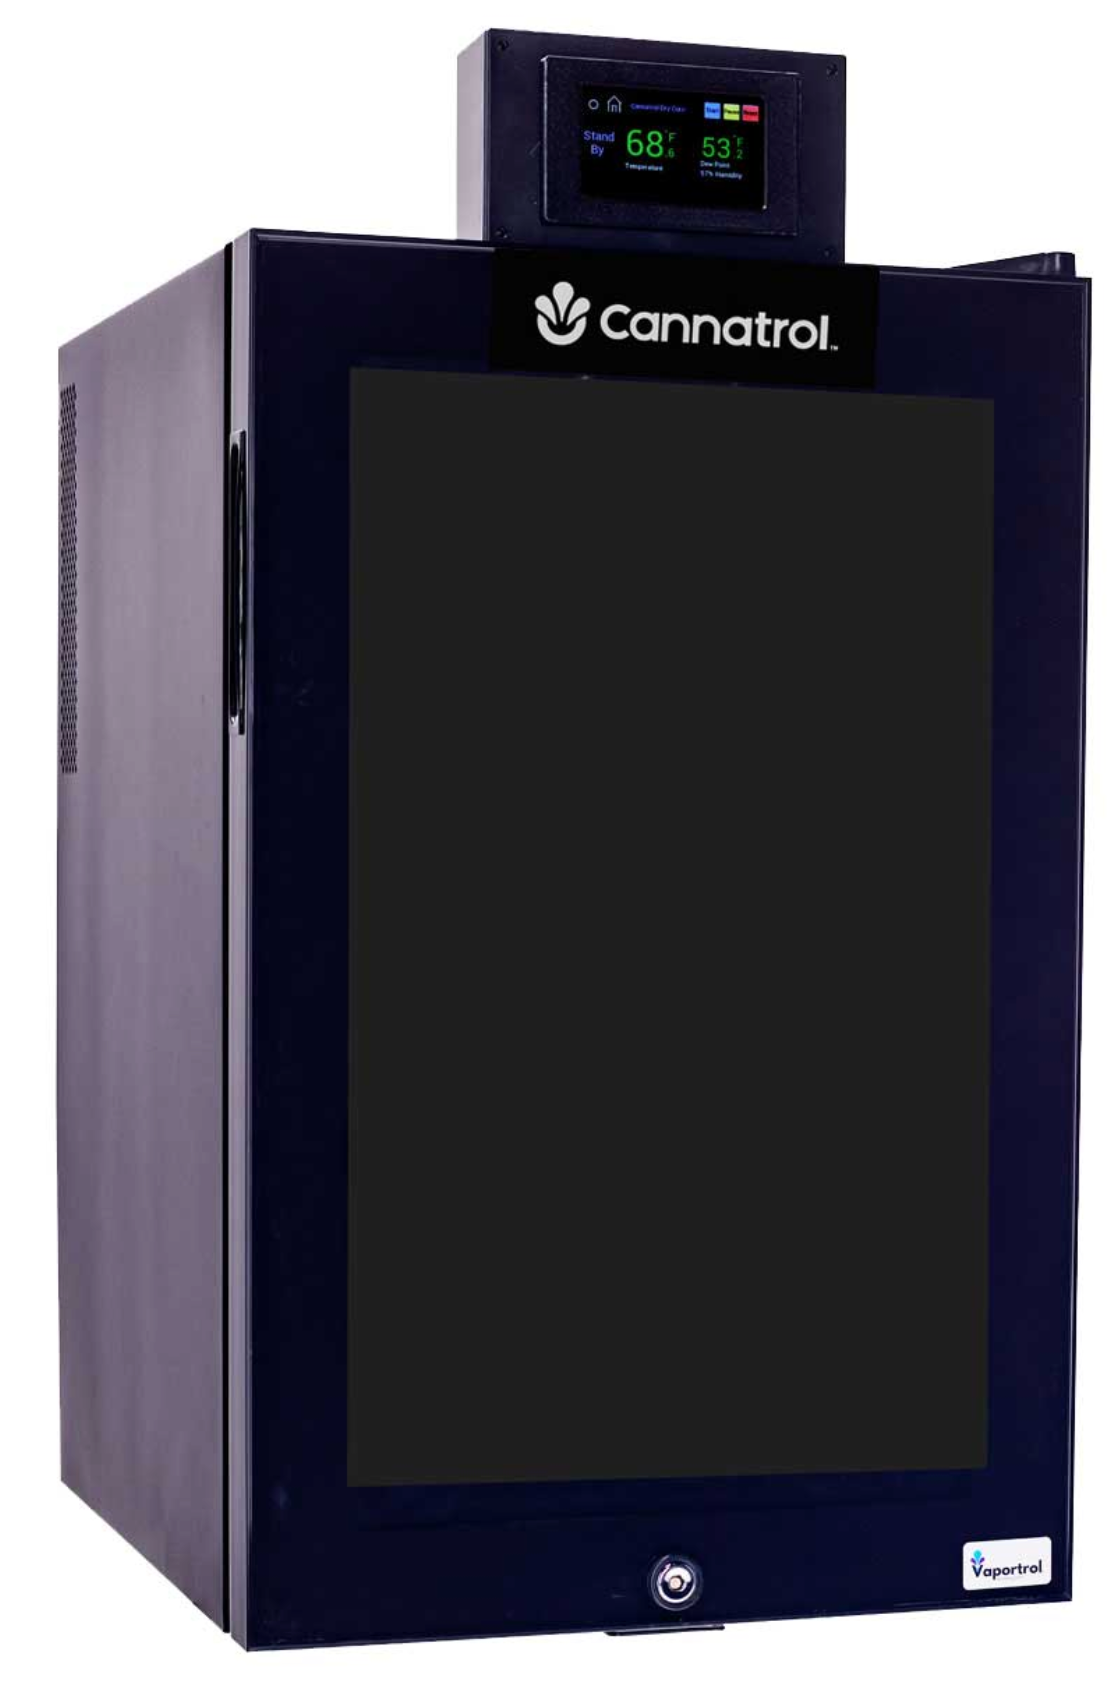 Cannatrol Cool Cure For Drying | Curing | Storing (Vaportrol Technology)